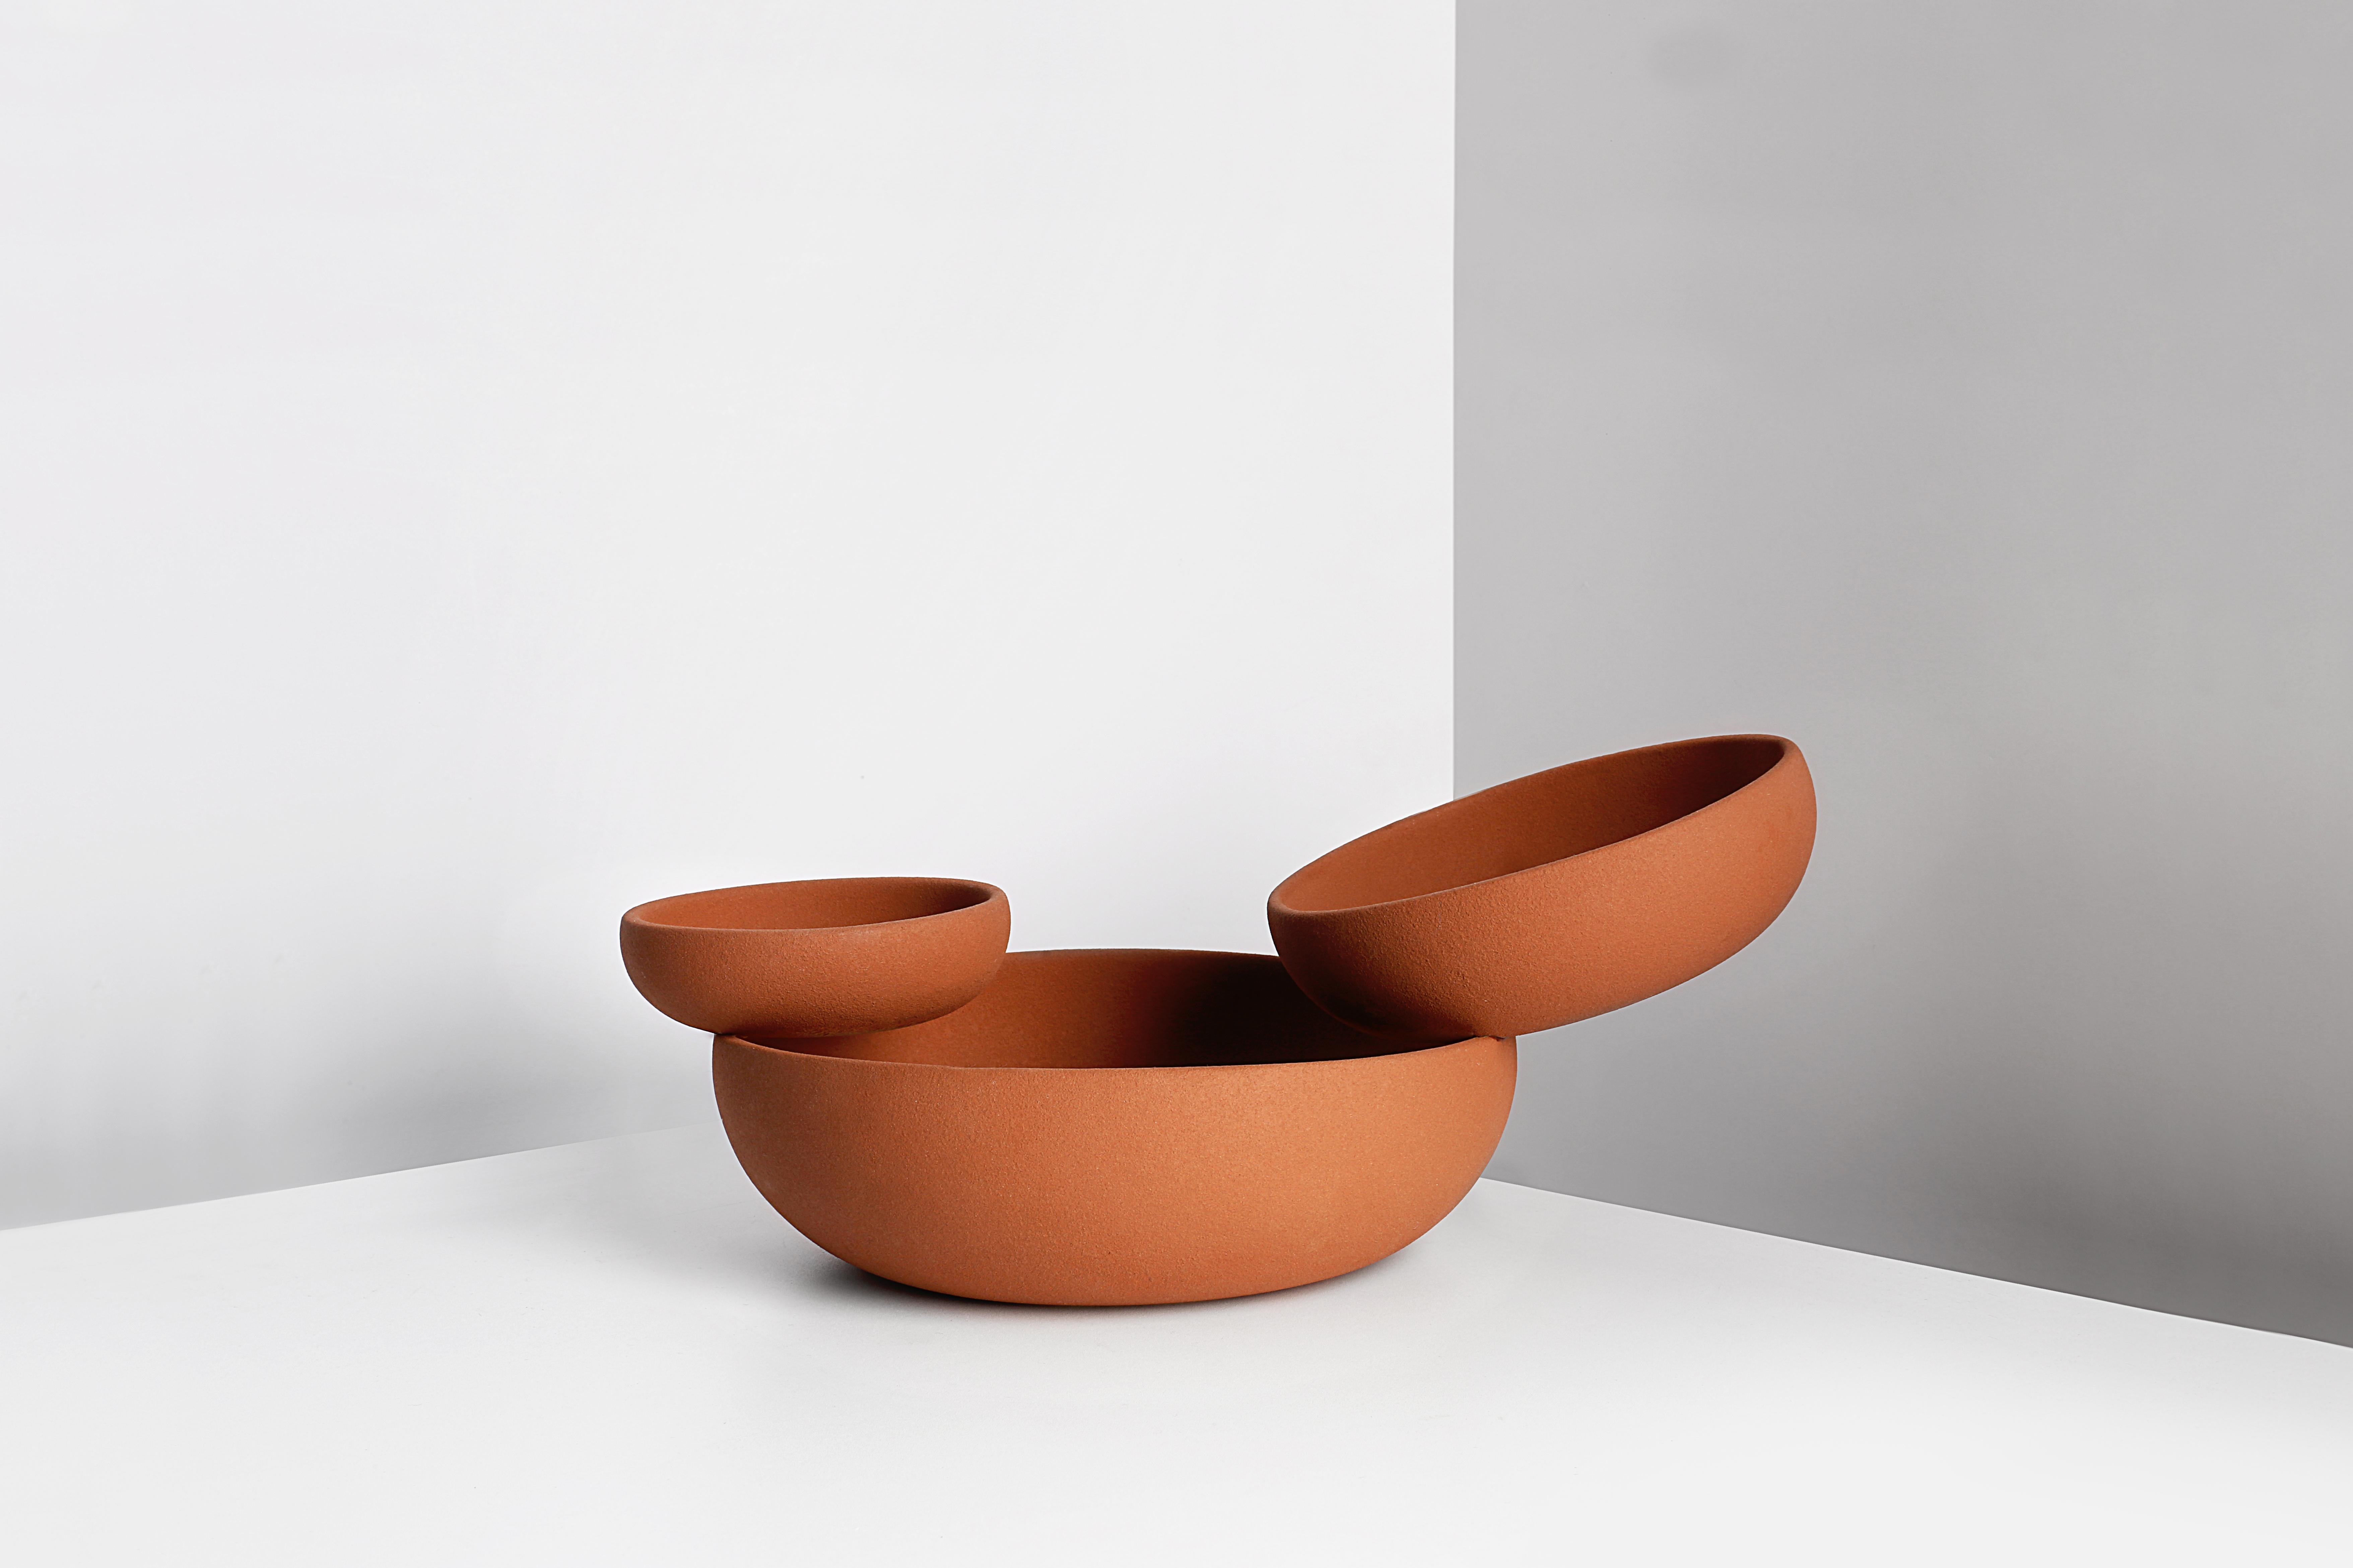 Clay balance bowls by Joel Escalona
Dimensions: D70 x W40 x H30 cm
Materials: Clay
Also available in different dimensions and materials.

The challenge of clay paste is not only found in the form and composition, but also in the history behind